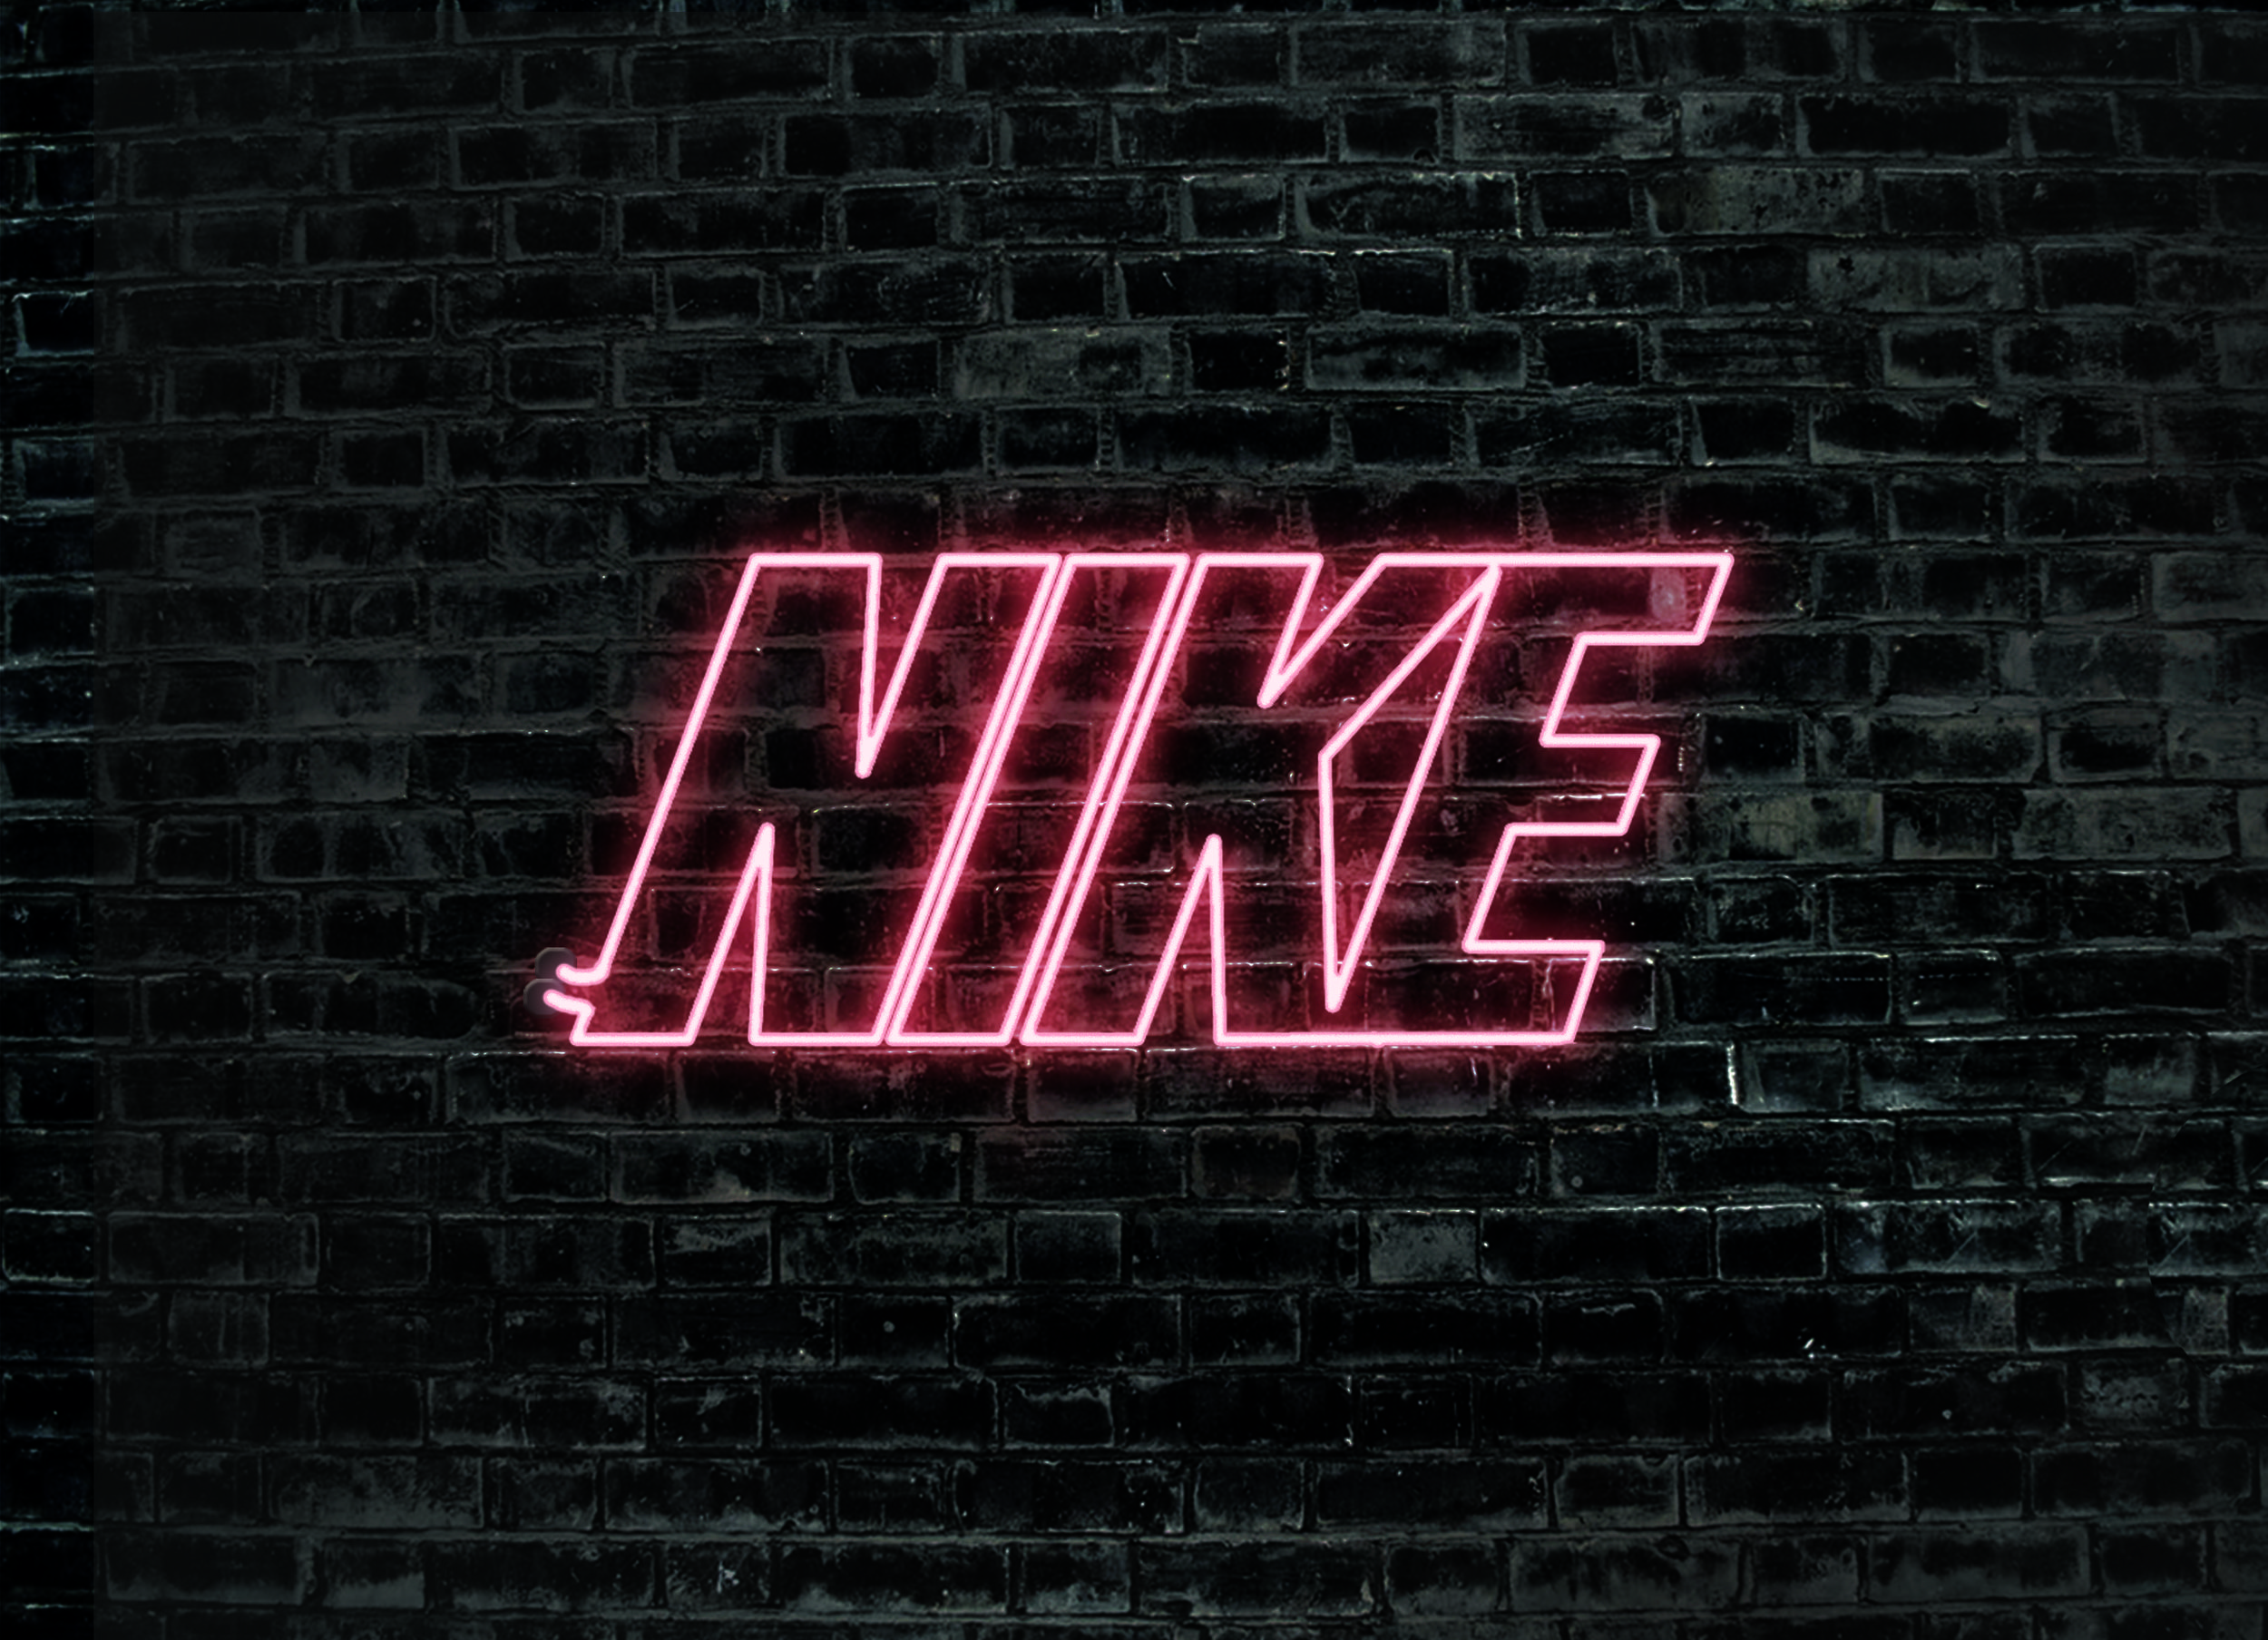 A brick wall with a pink neon sign that spells out Nike. - Nike